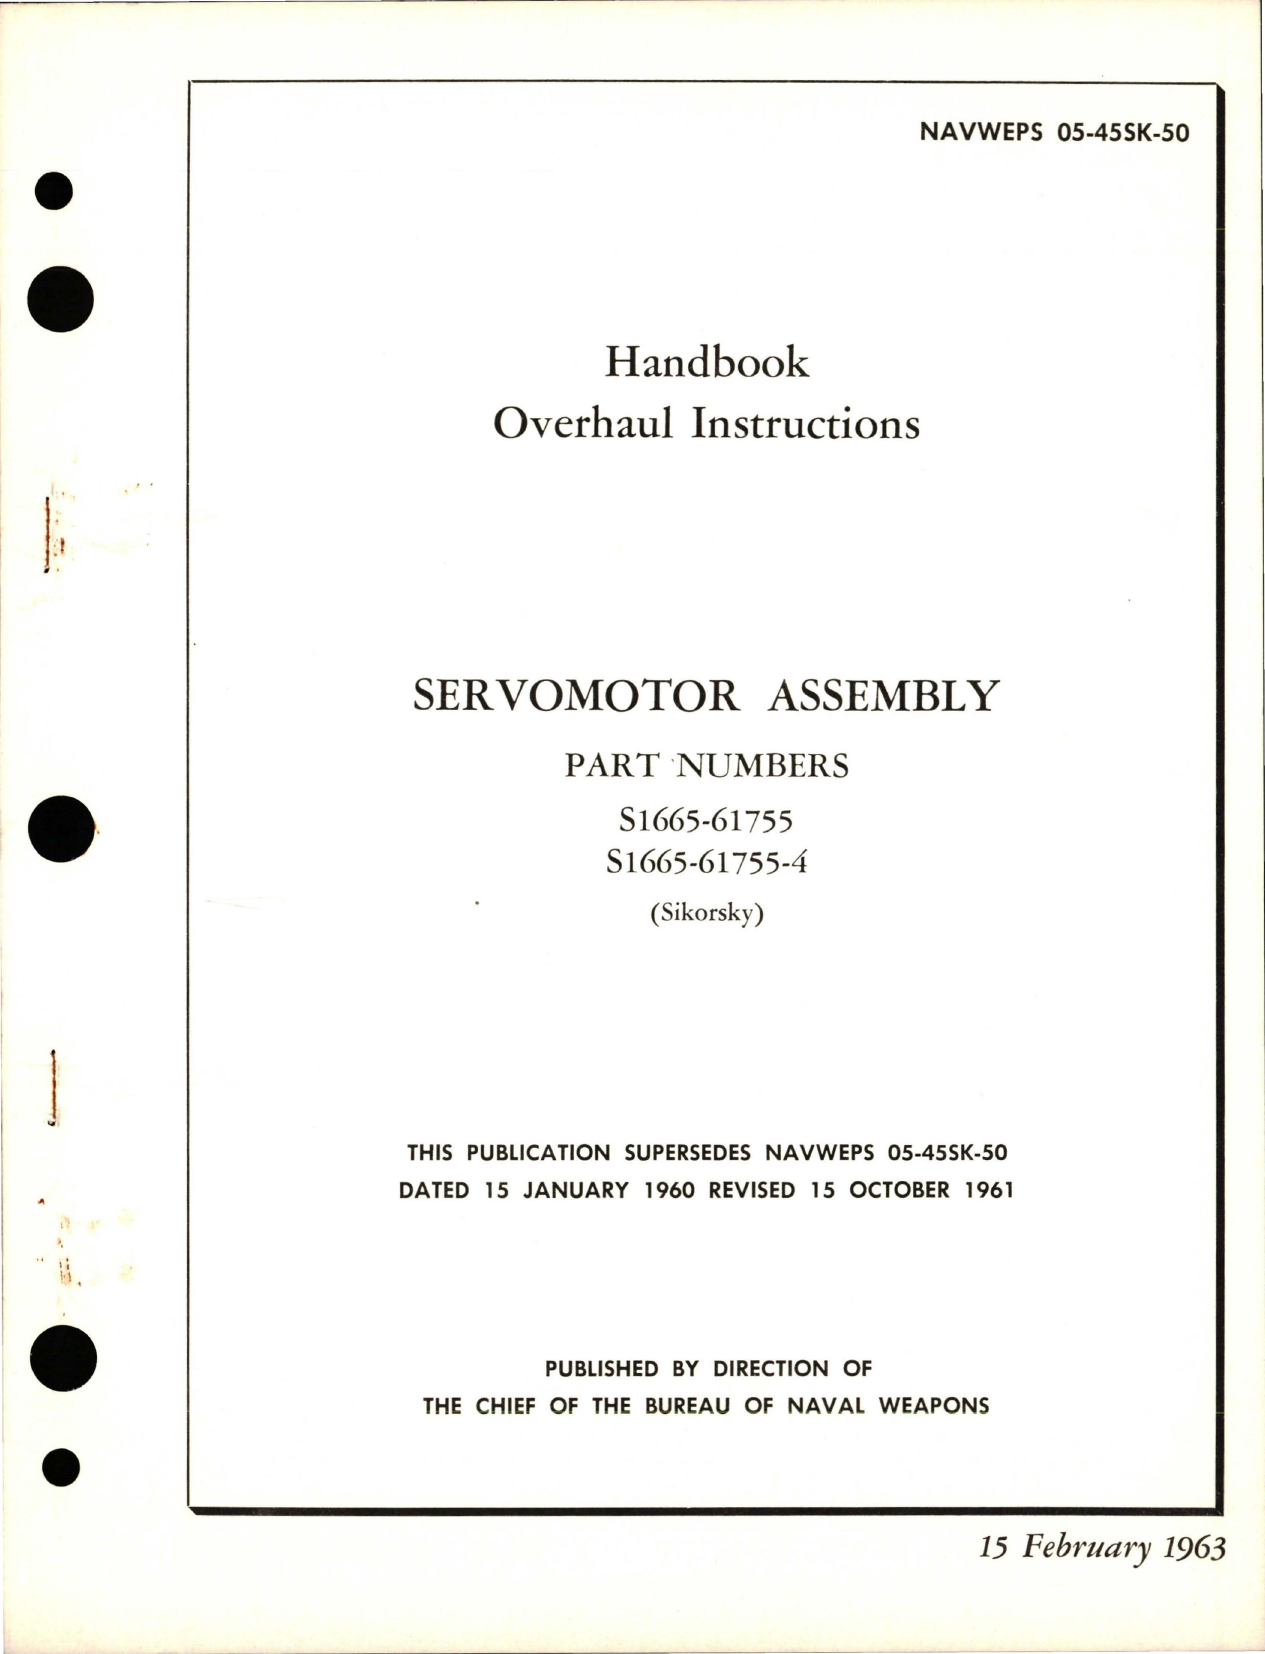 Sample page 1 from AirCorps Library document: Overhaul Instructions for Servomotor Assembly - Parts S1665-61755 and S1665-61755-4